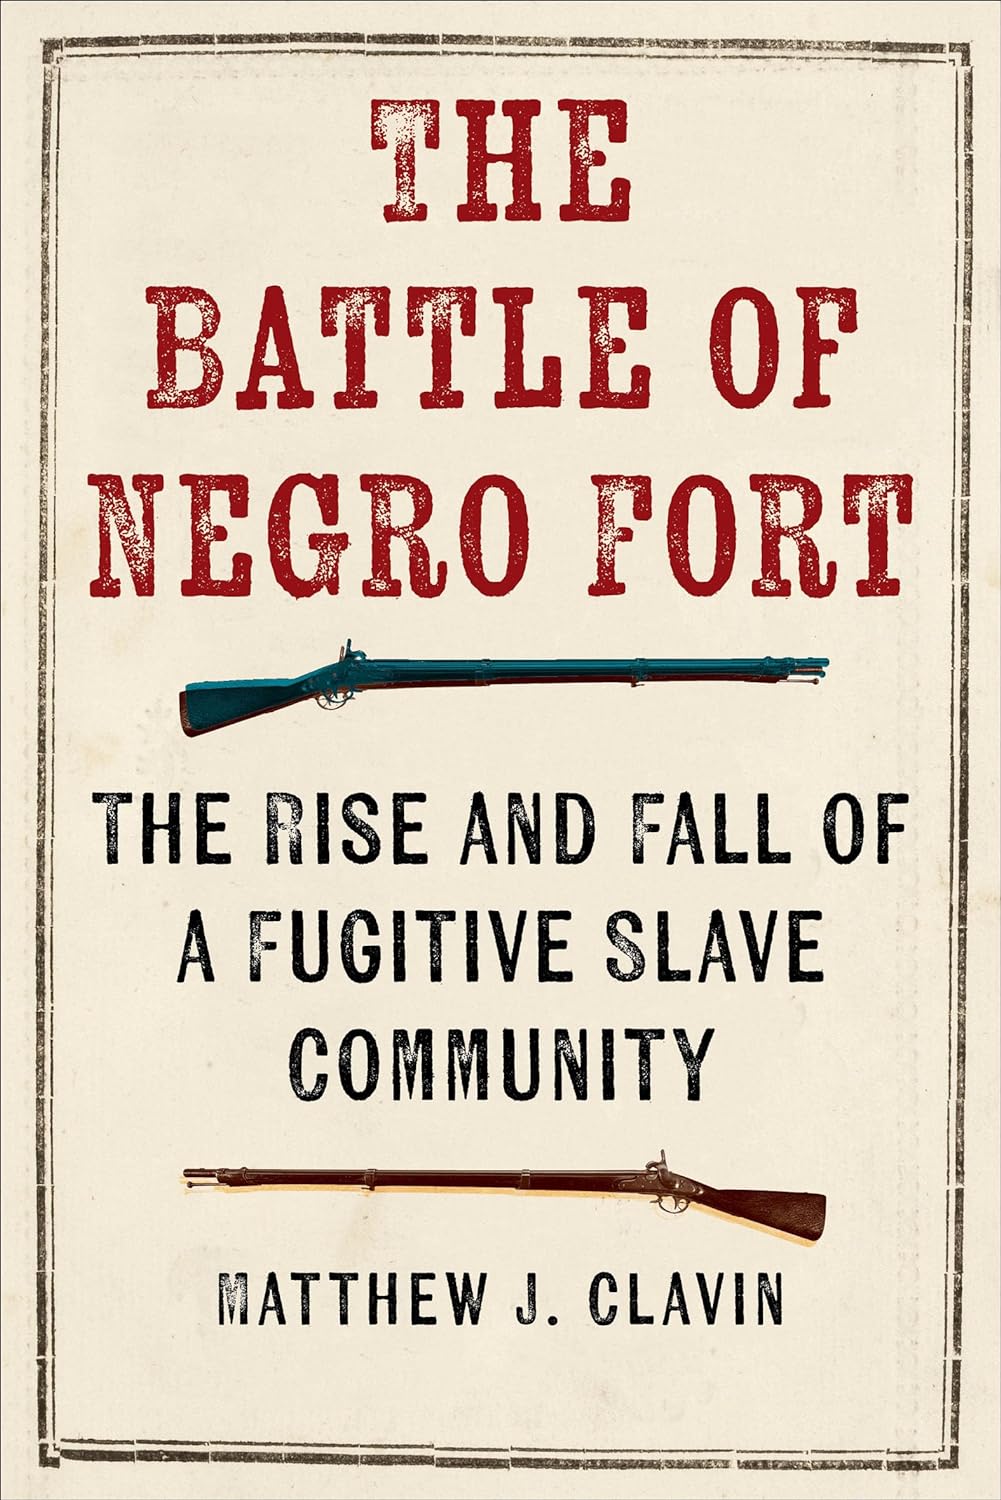 Image for "The Battle of Negro Fort"